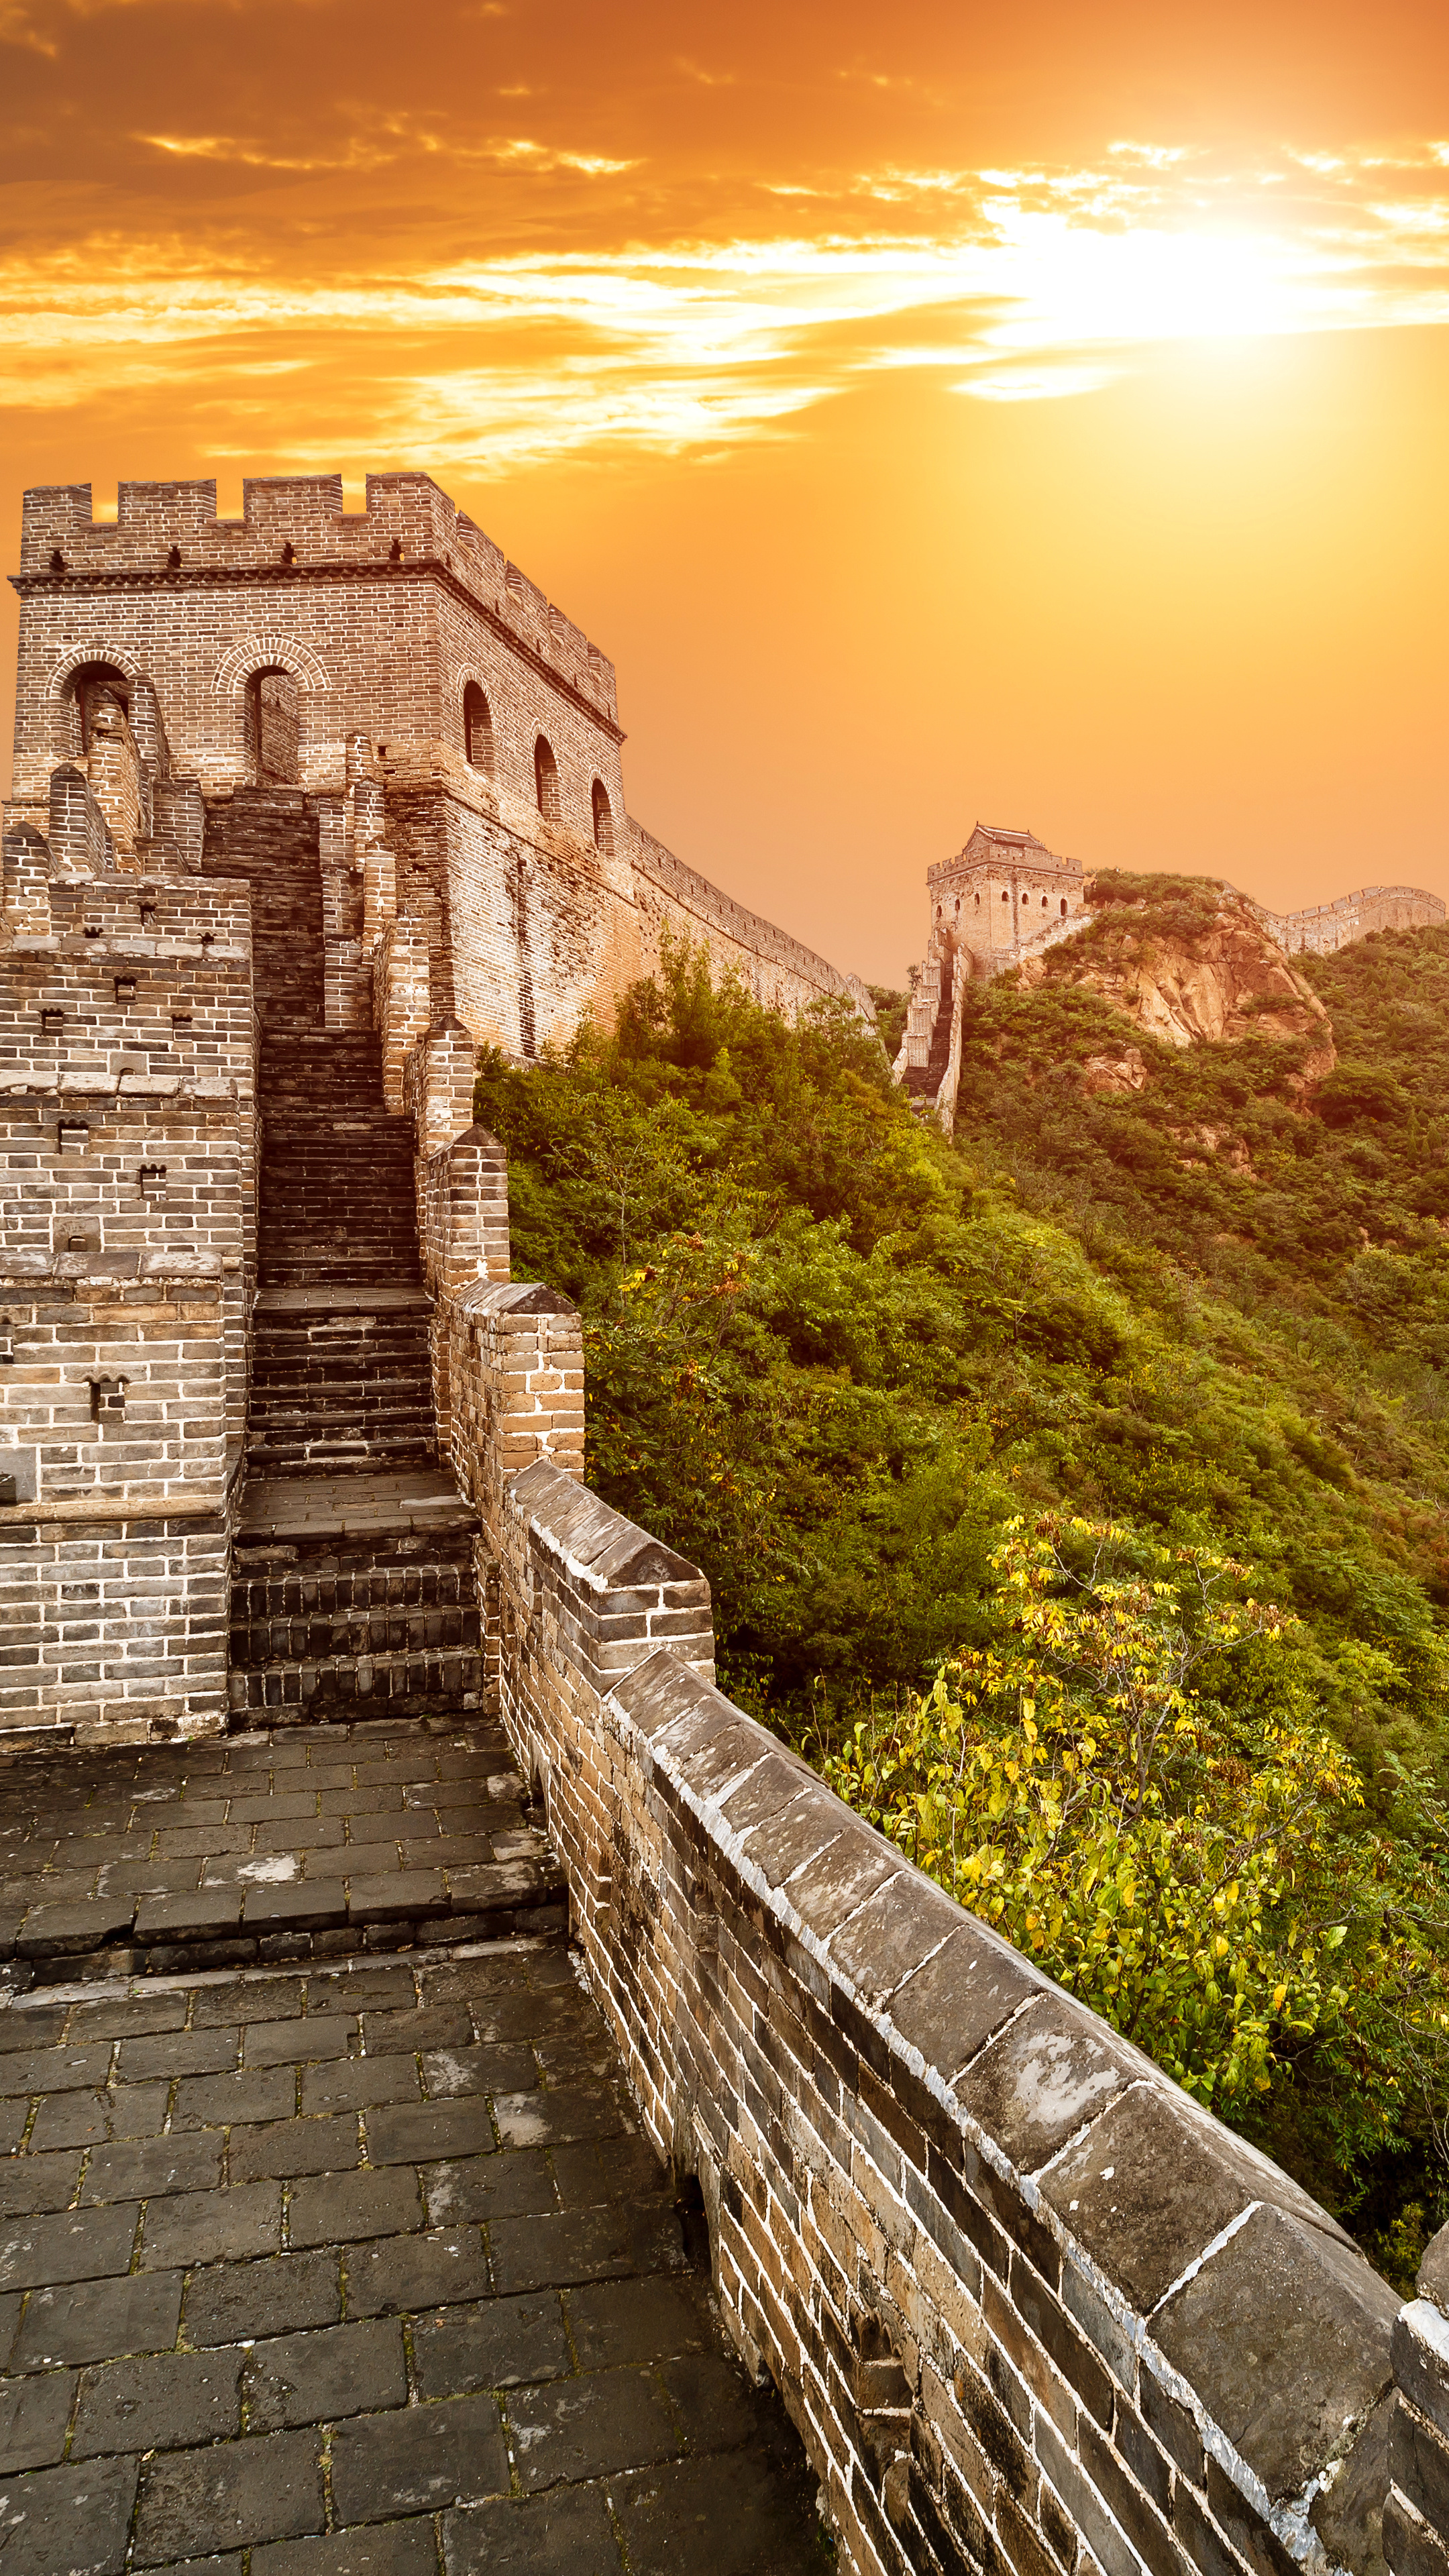 Great Wall of China: Was used as border controls, allowing the imposition of duties on goods transported along the Silk Road. 2160x3840 4K Background.